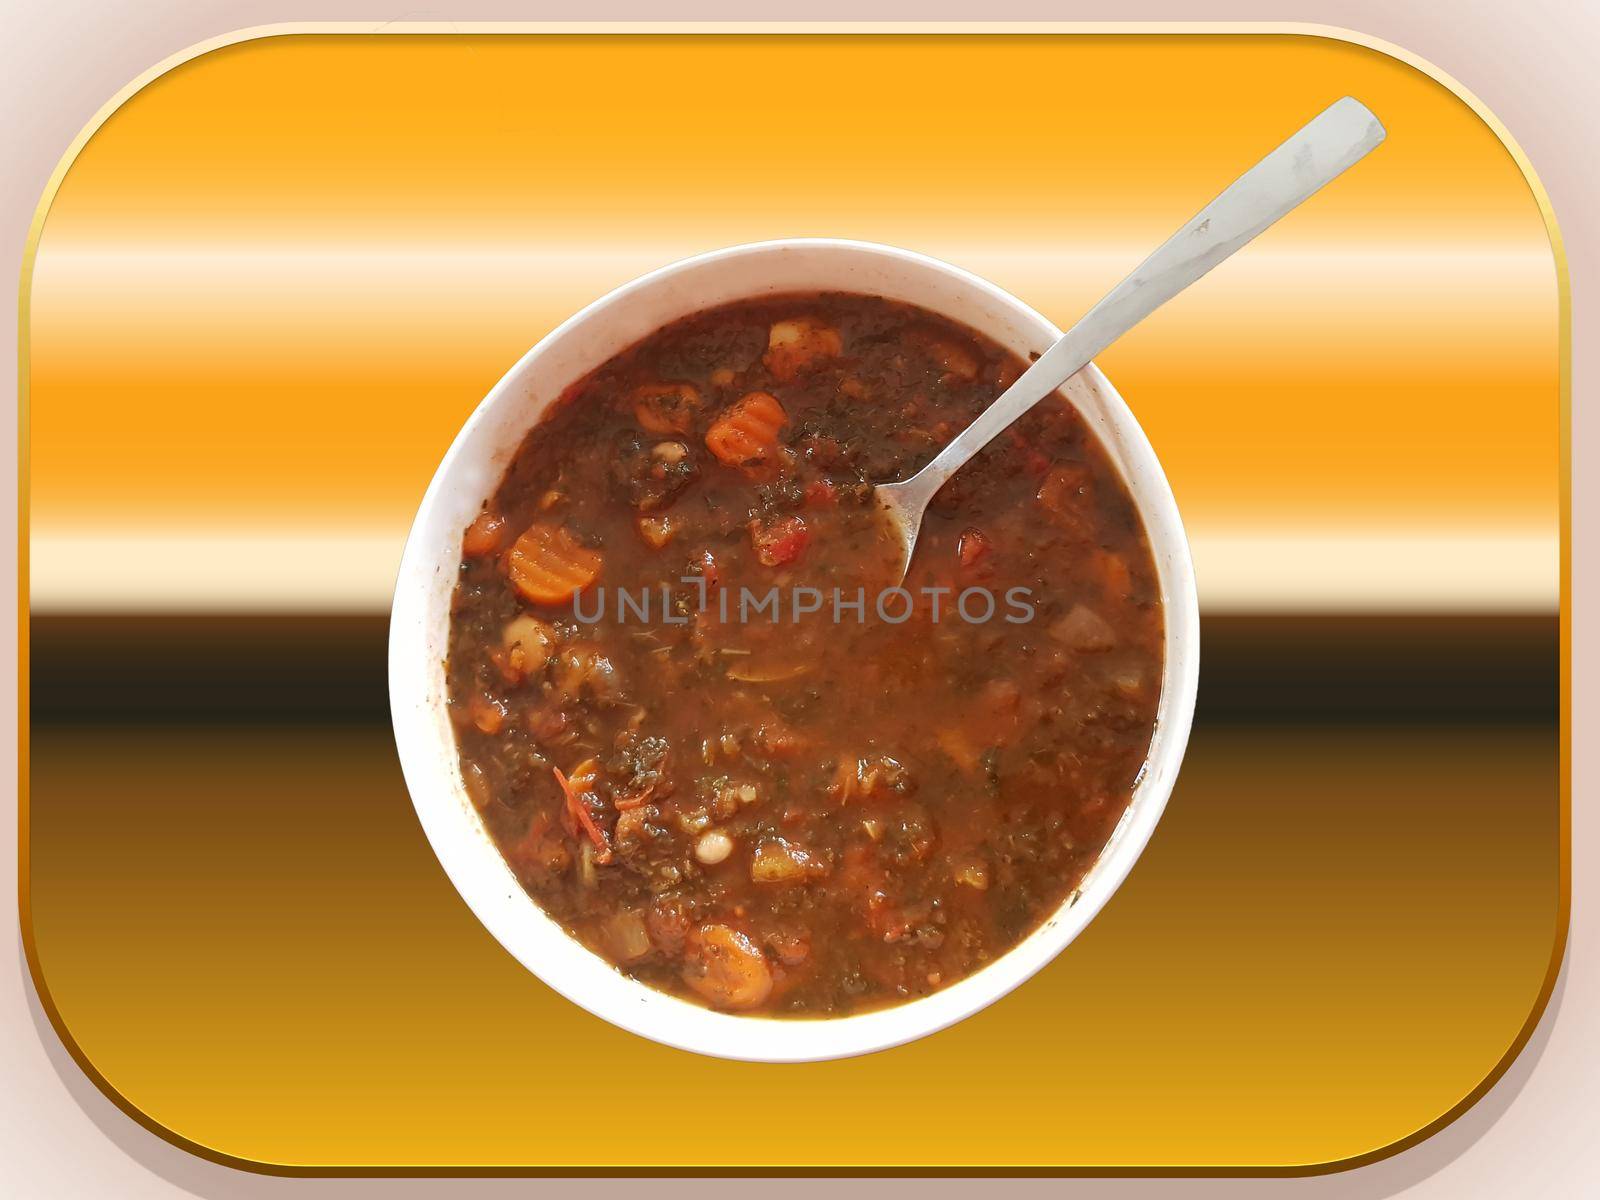 Gazpacho soup with spicy roasted chickpeas on a dark background. Healthy vegetarian diet weight loss concept